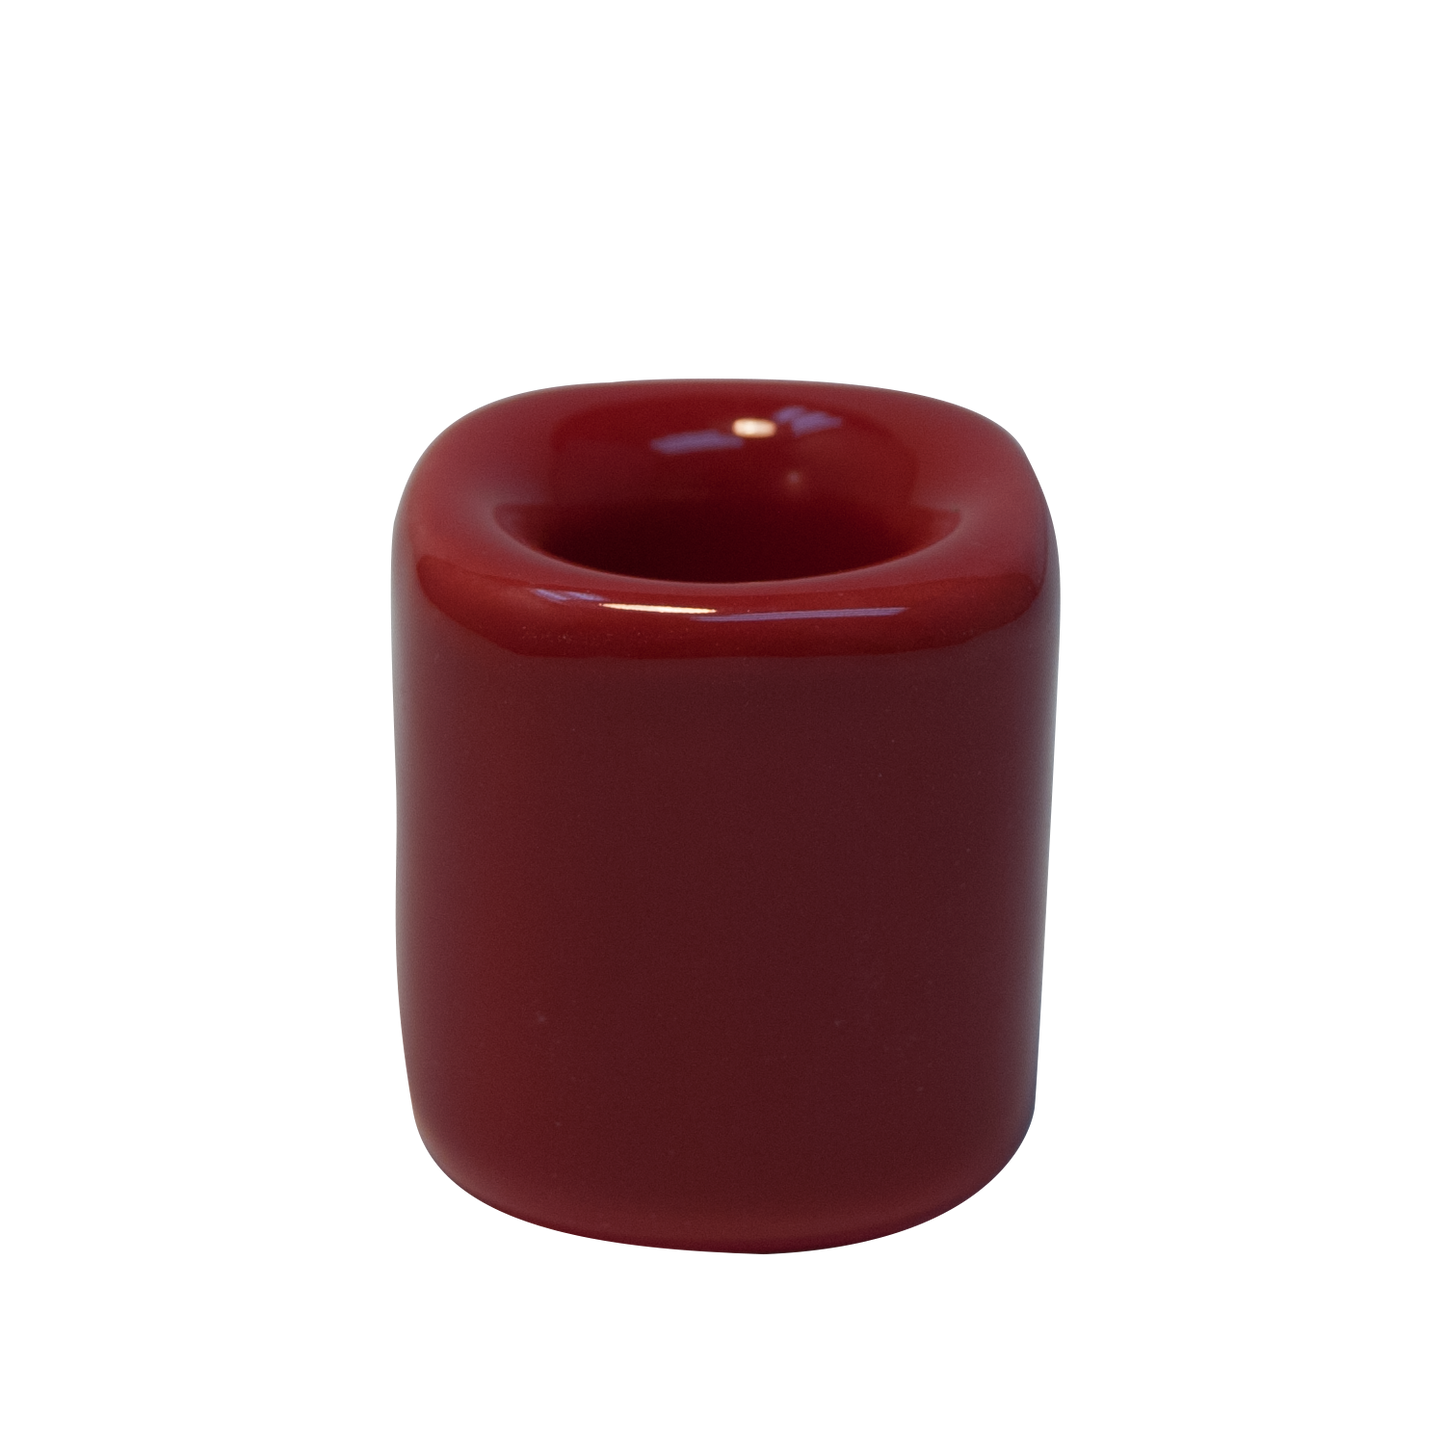 Chime Candle Holder - Red Porcelain (10 Peaches)